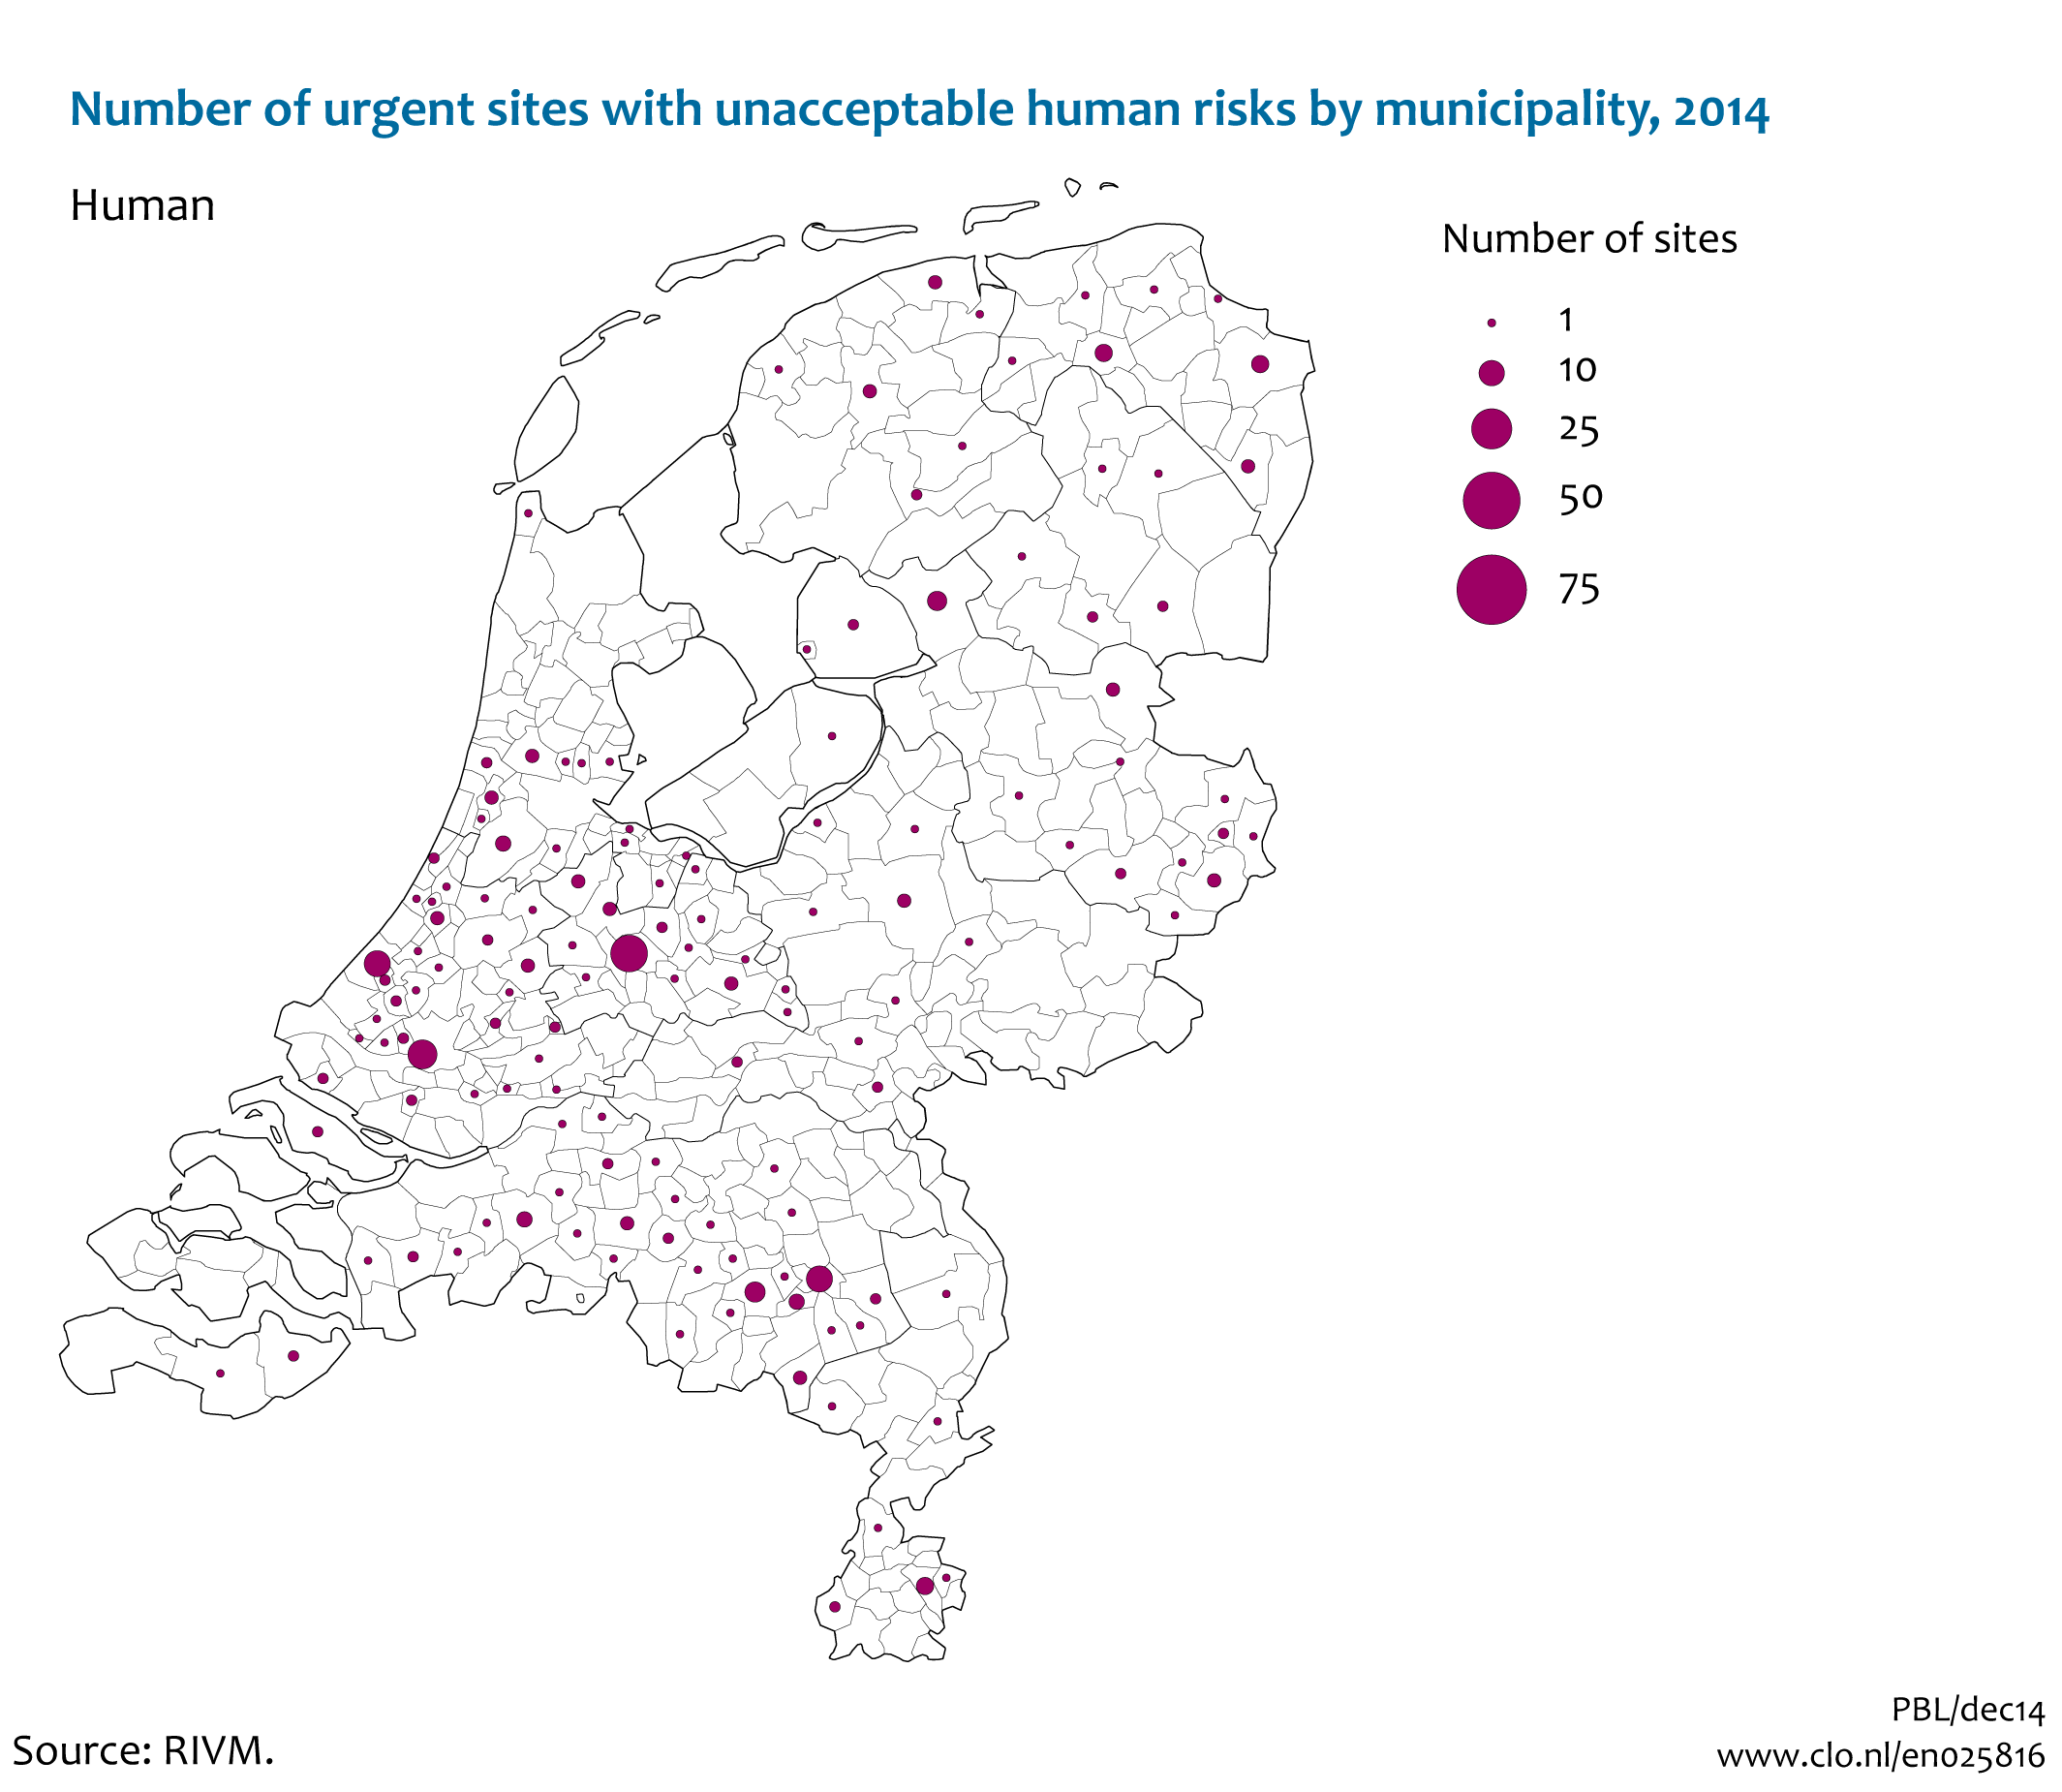 Image  Number of urgent sites with unacceptable human risks by municipality . The image is further explained in the text.